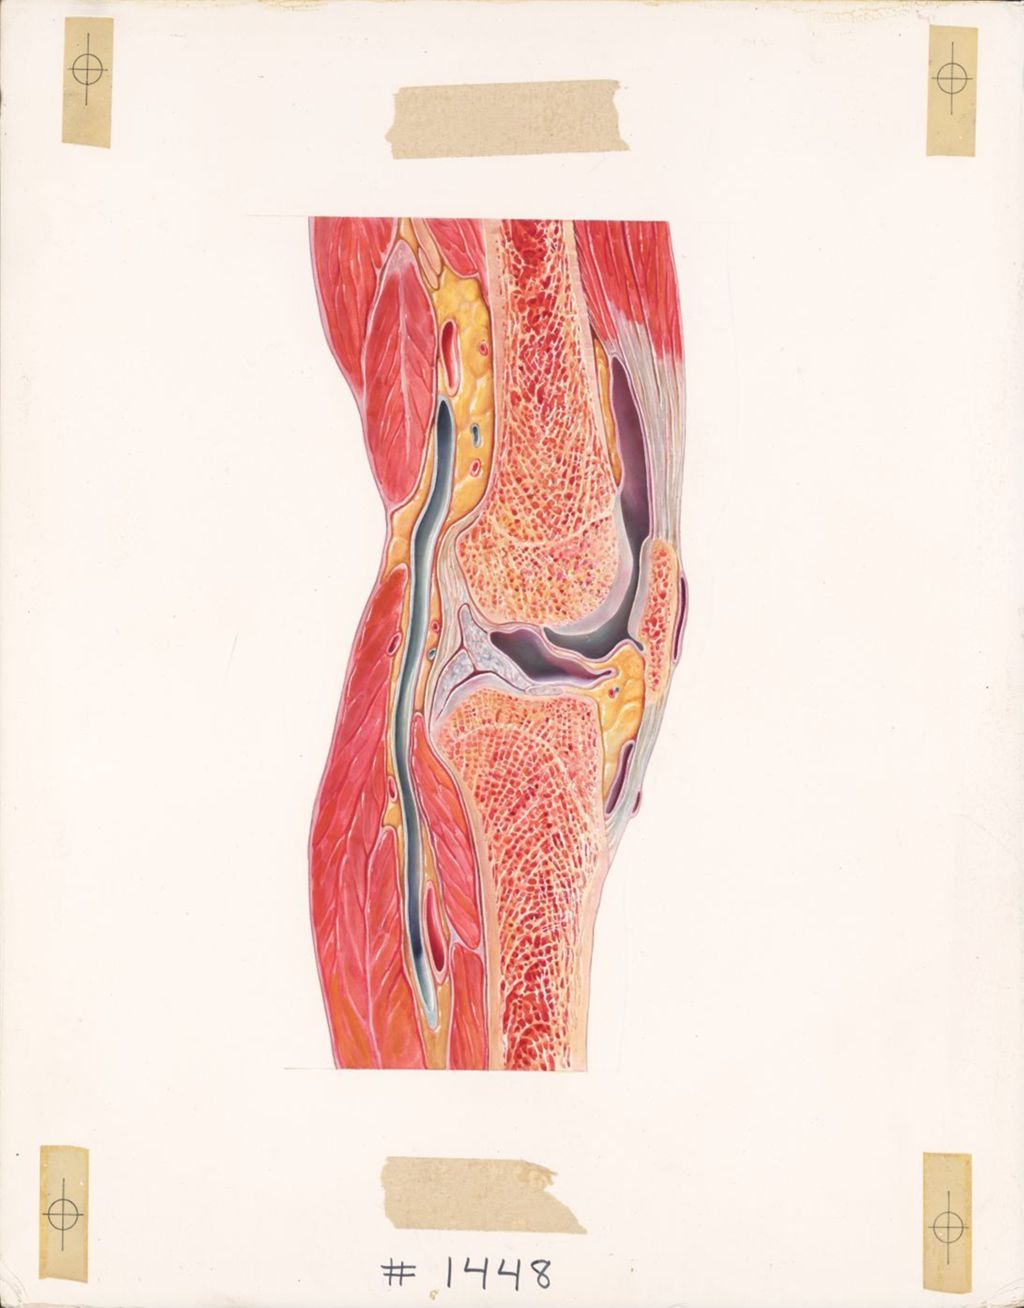 Miniature of The knee, sagittal section through the knee